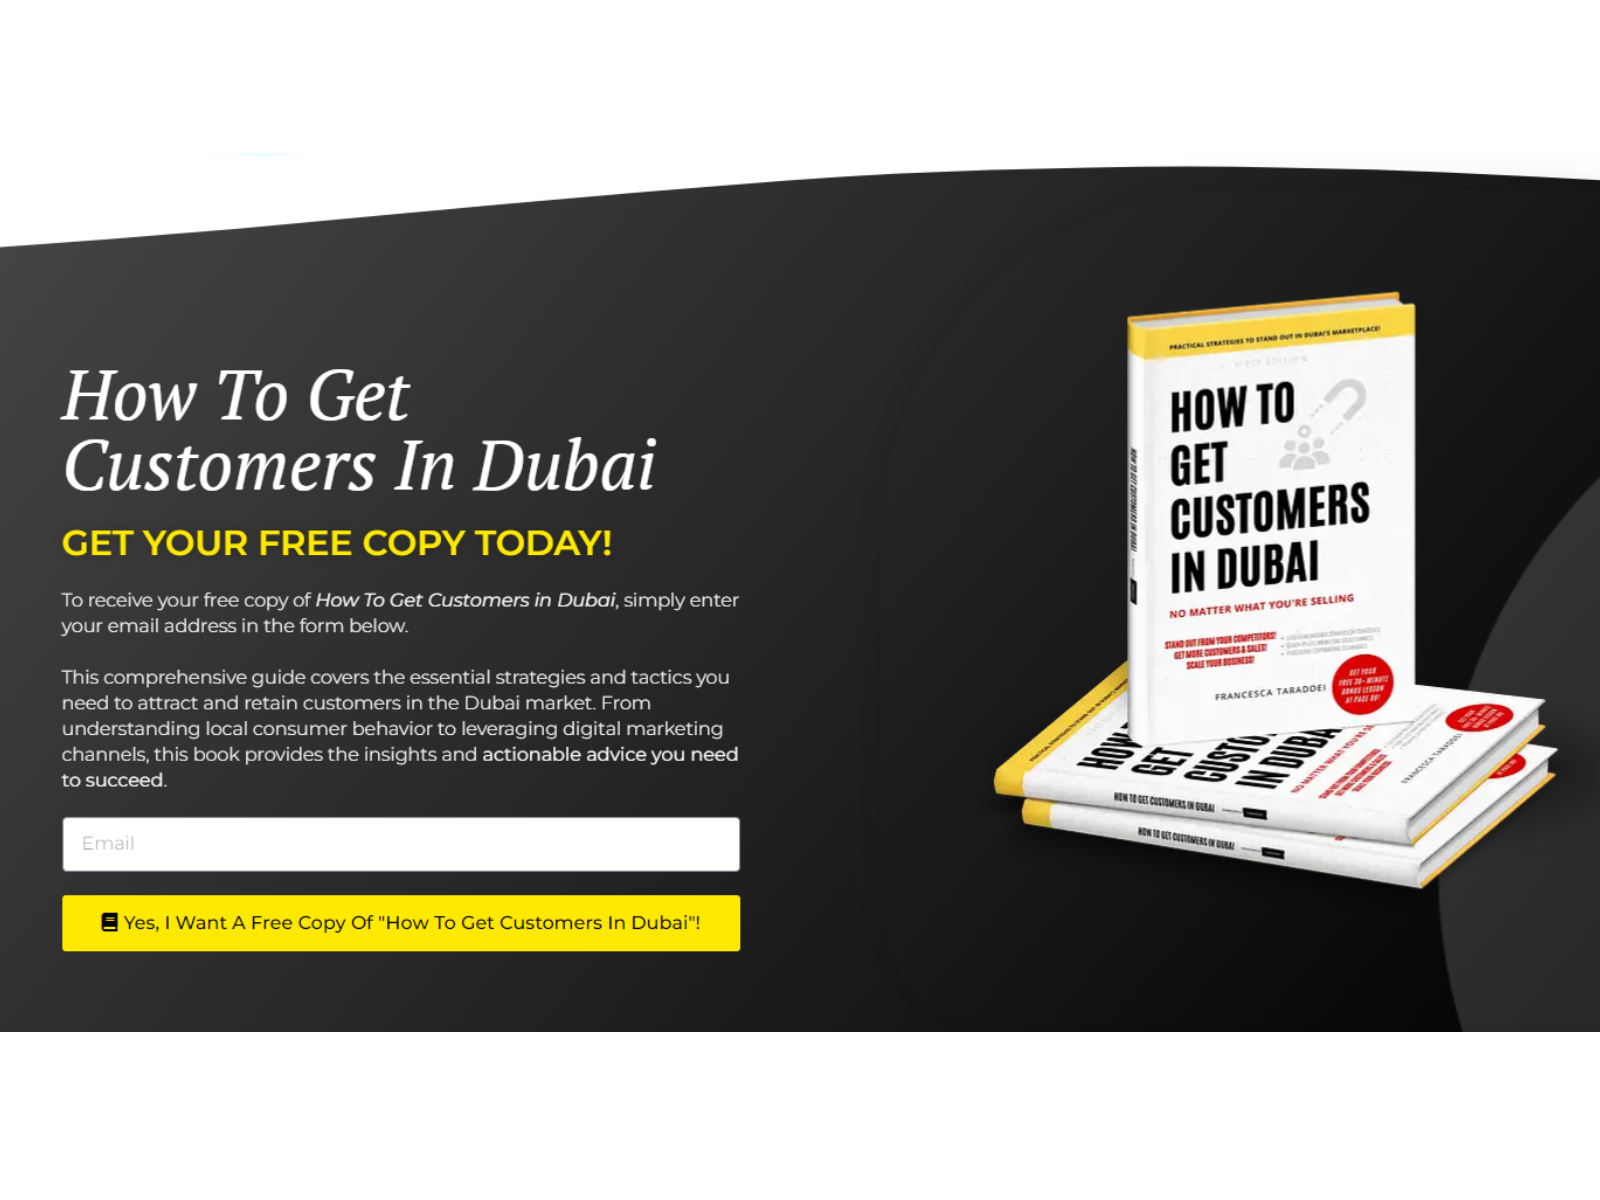 How To Get Customers In Dubai